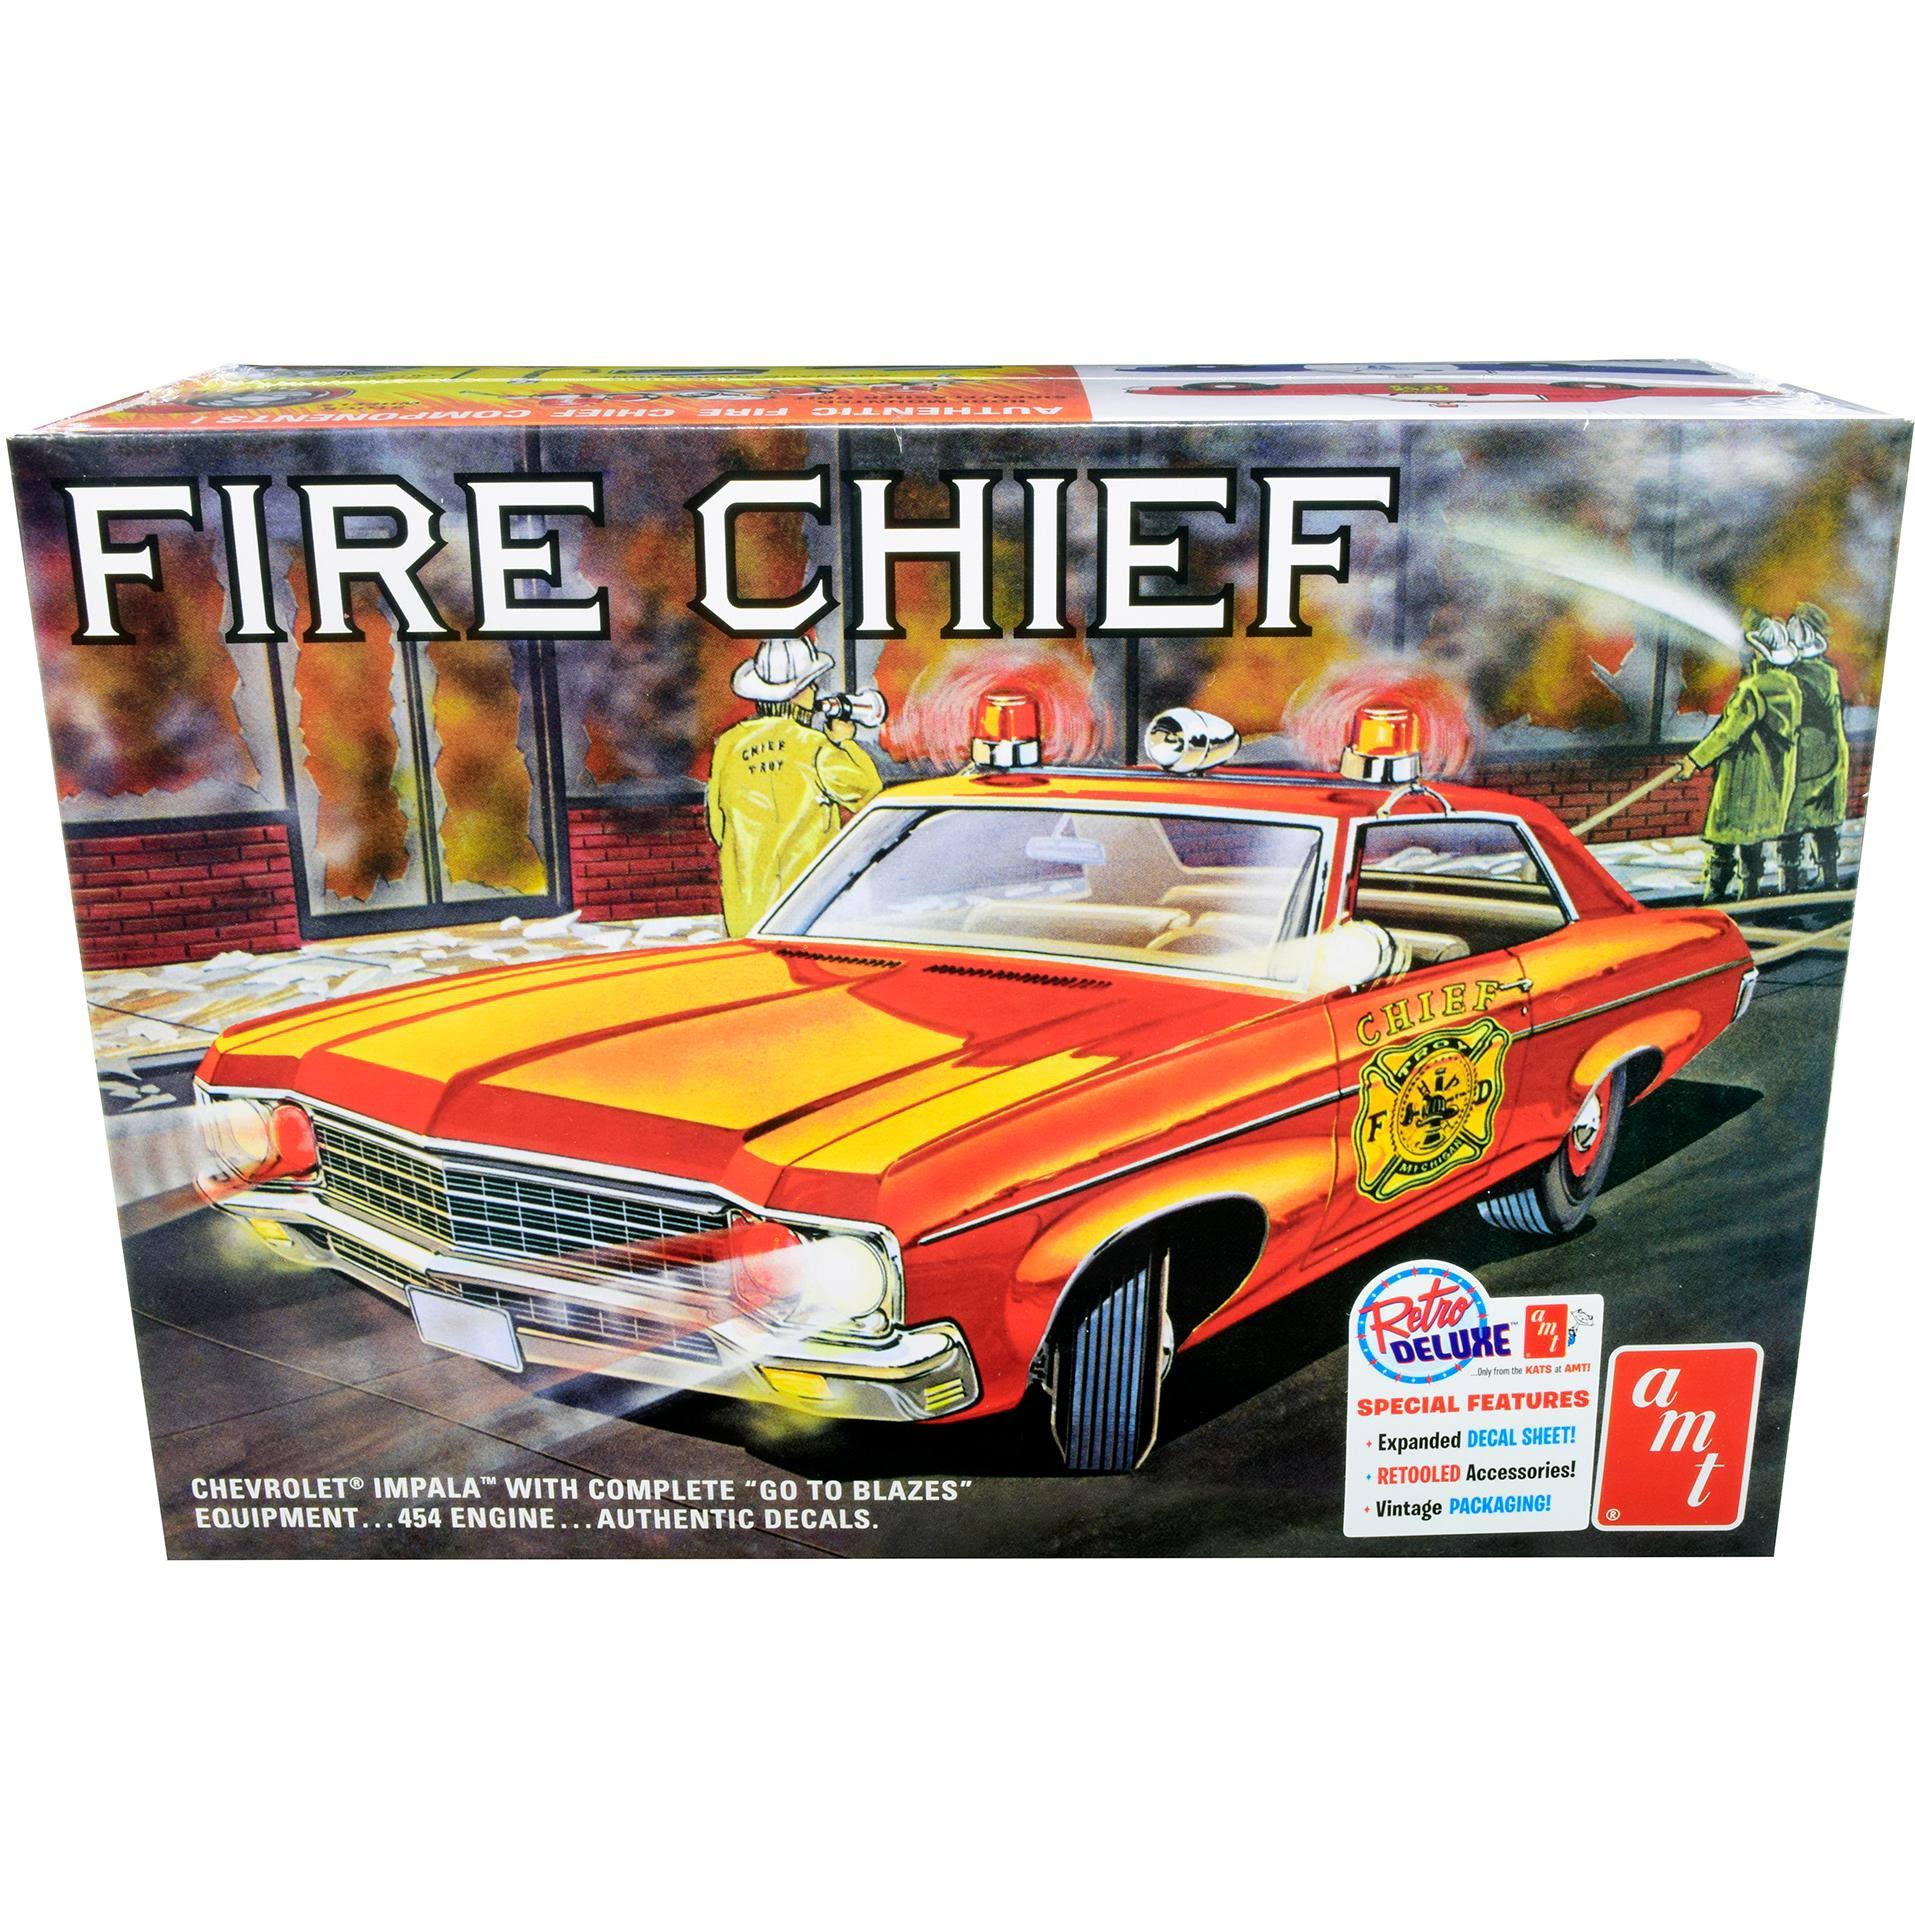 AMT Skill 2 Model Kit 1970 Chevrolet Impala Fire Chief 2 in 1 Kit 1/25 Scale Model